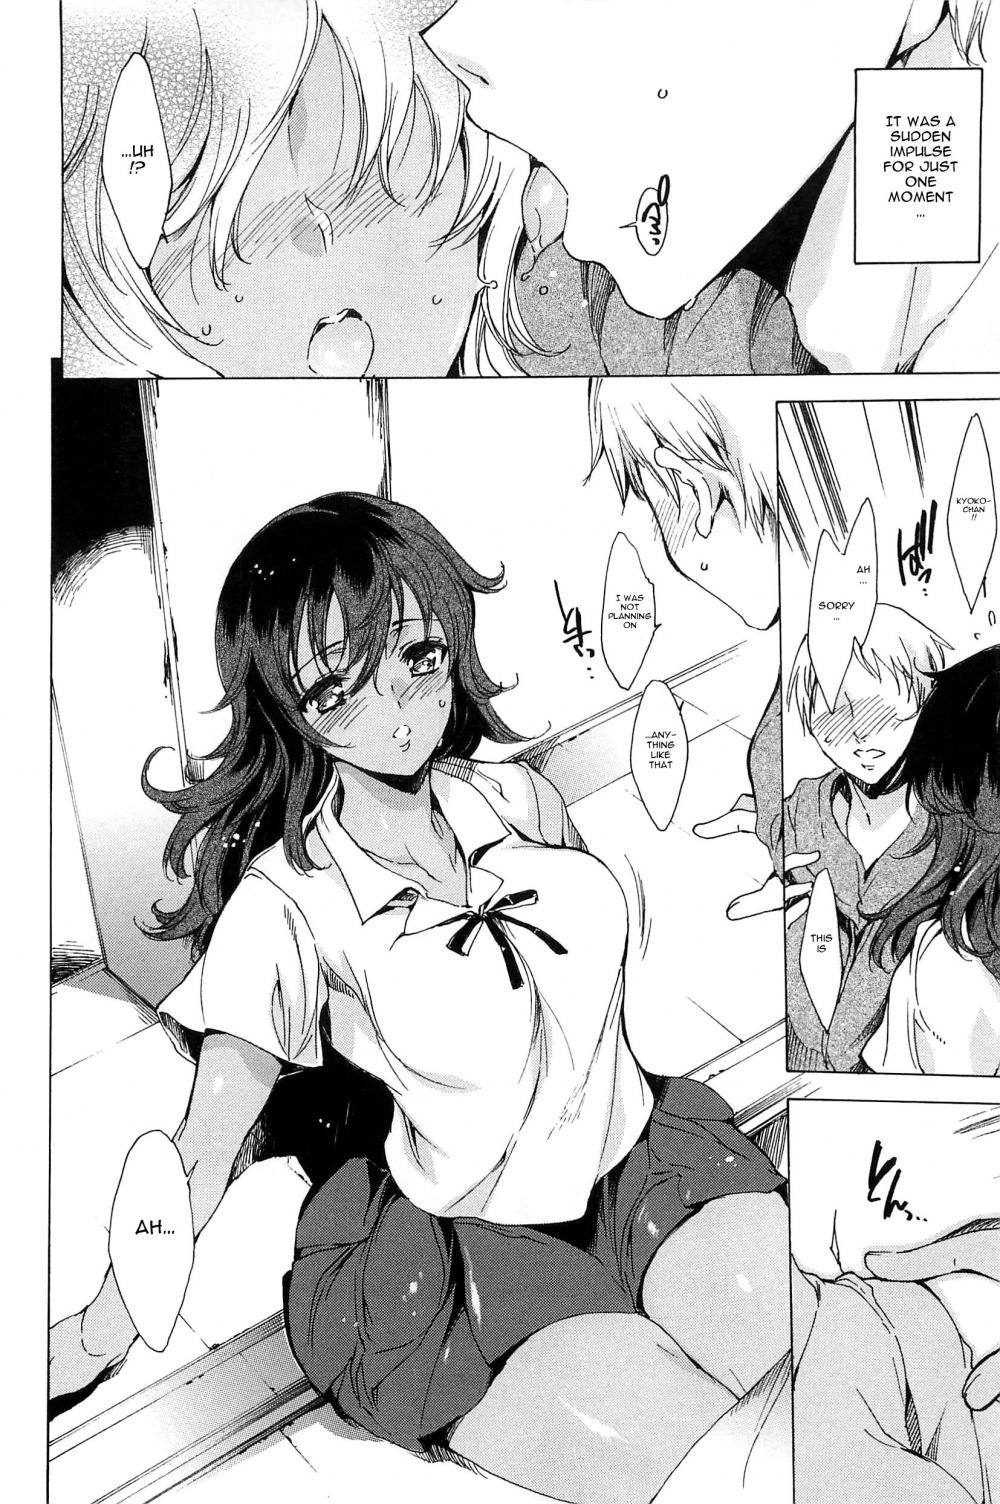 Chains of Lust - NTR Girlfriend-Chapter 10-Hentai Manga Hentai Comic -  Page: 10 - Online porn video at mobile